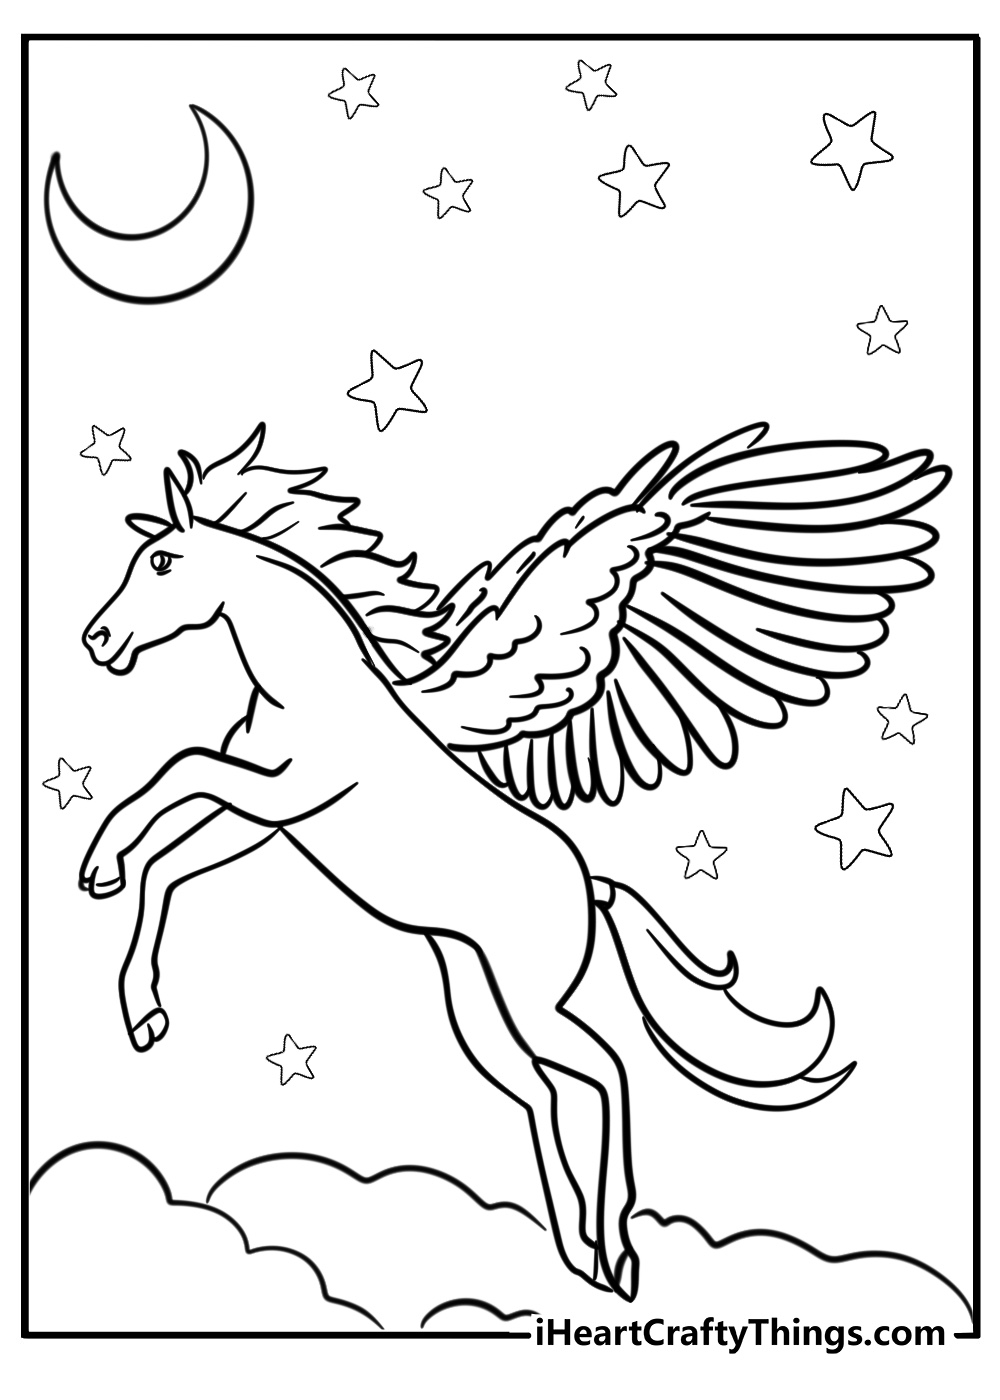 Pegasus coloring page with massive wings in the starry night sky